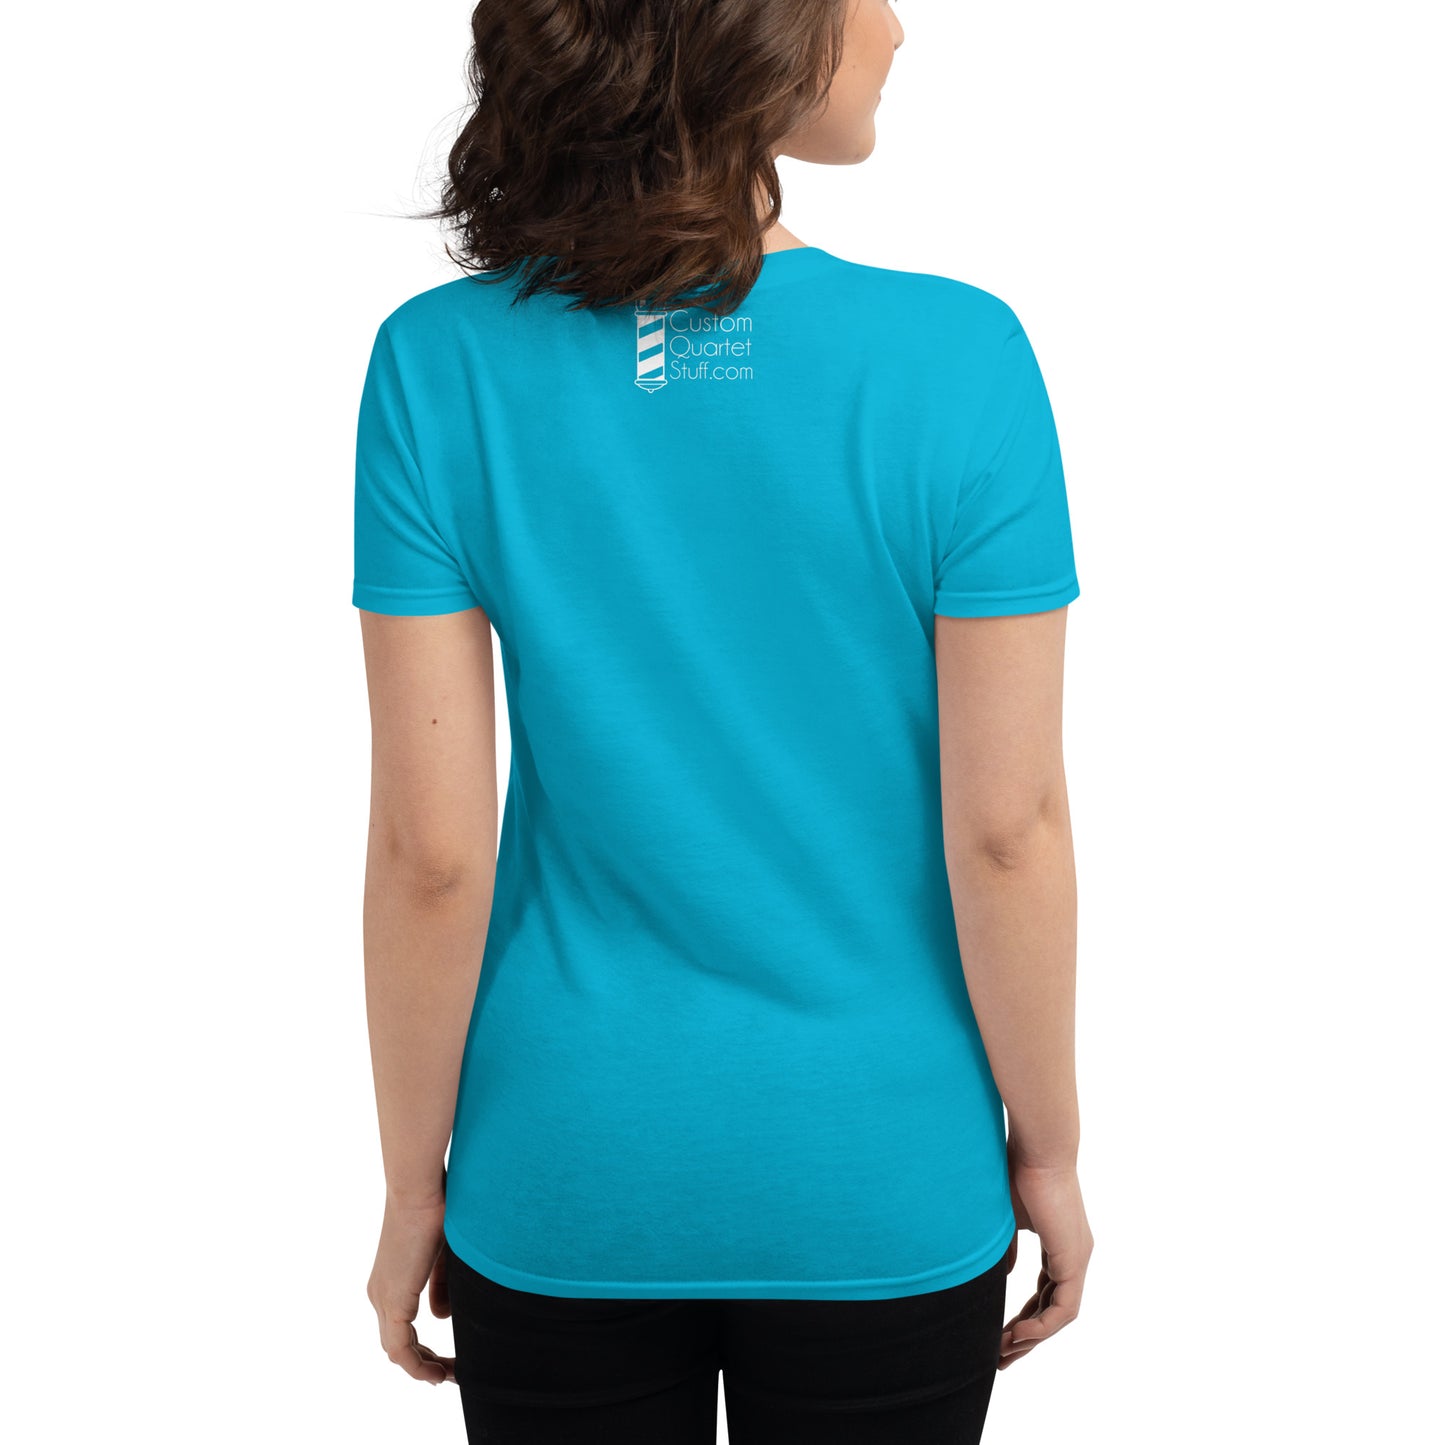 SHD Printed - Fitted Women's short sleeve t-shirt